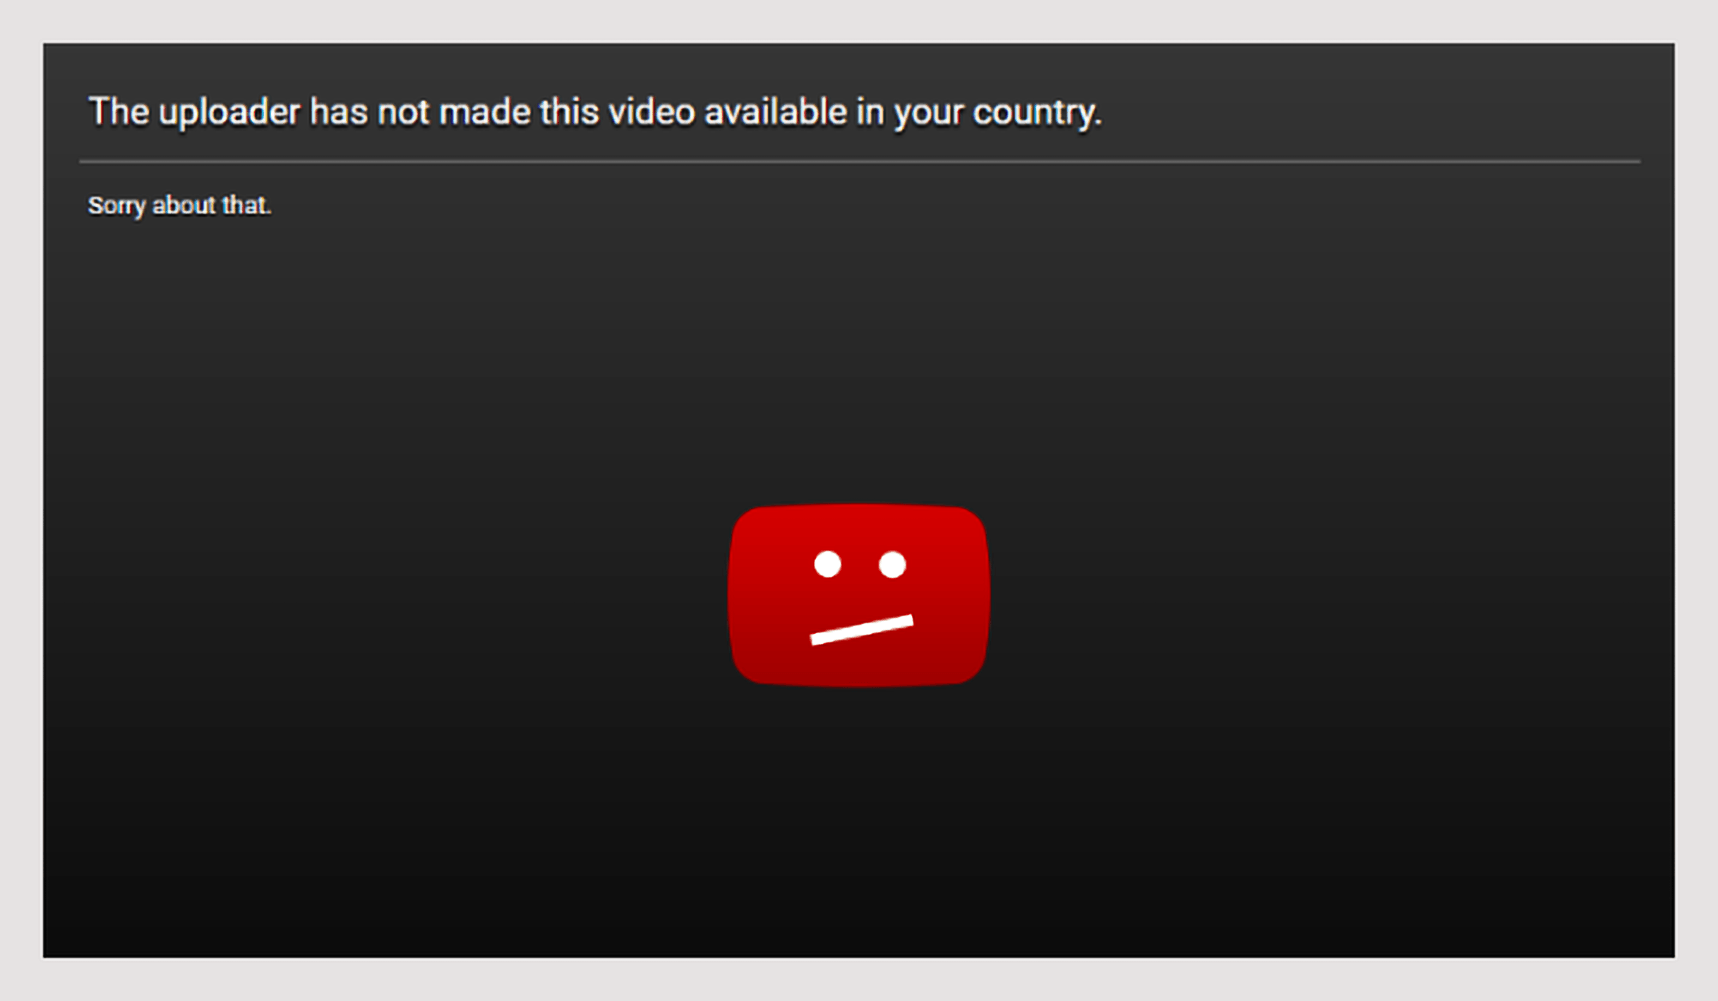 The uploader has not made this video available in Your Country [YouTube]